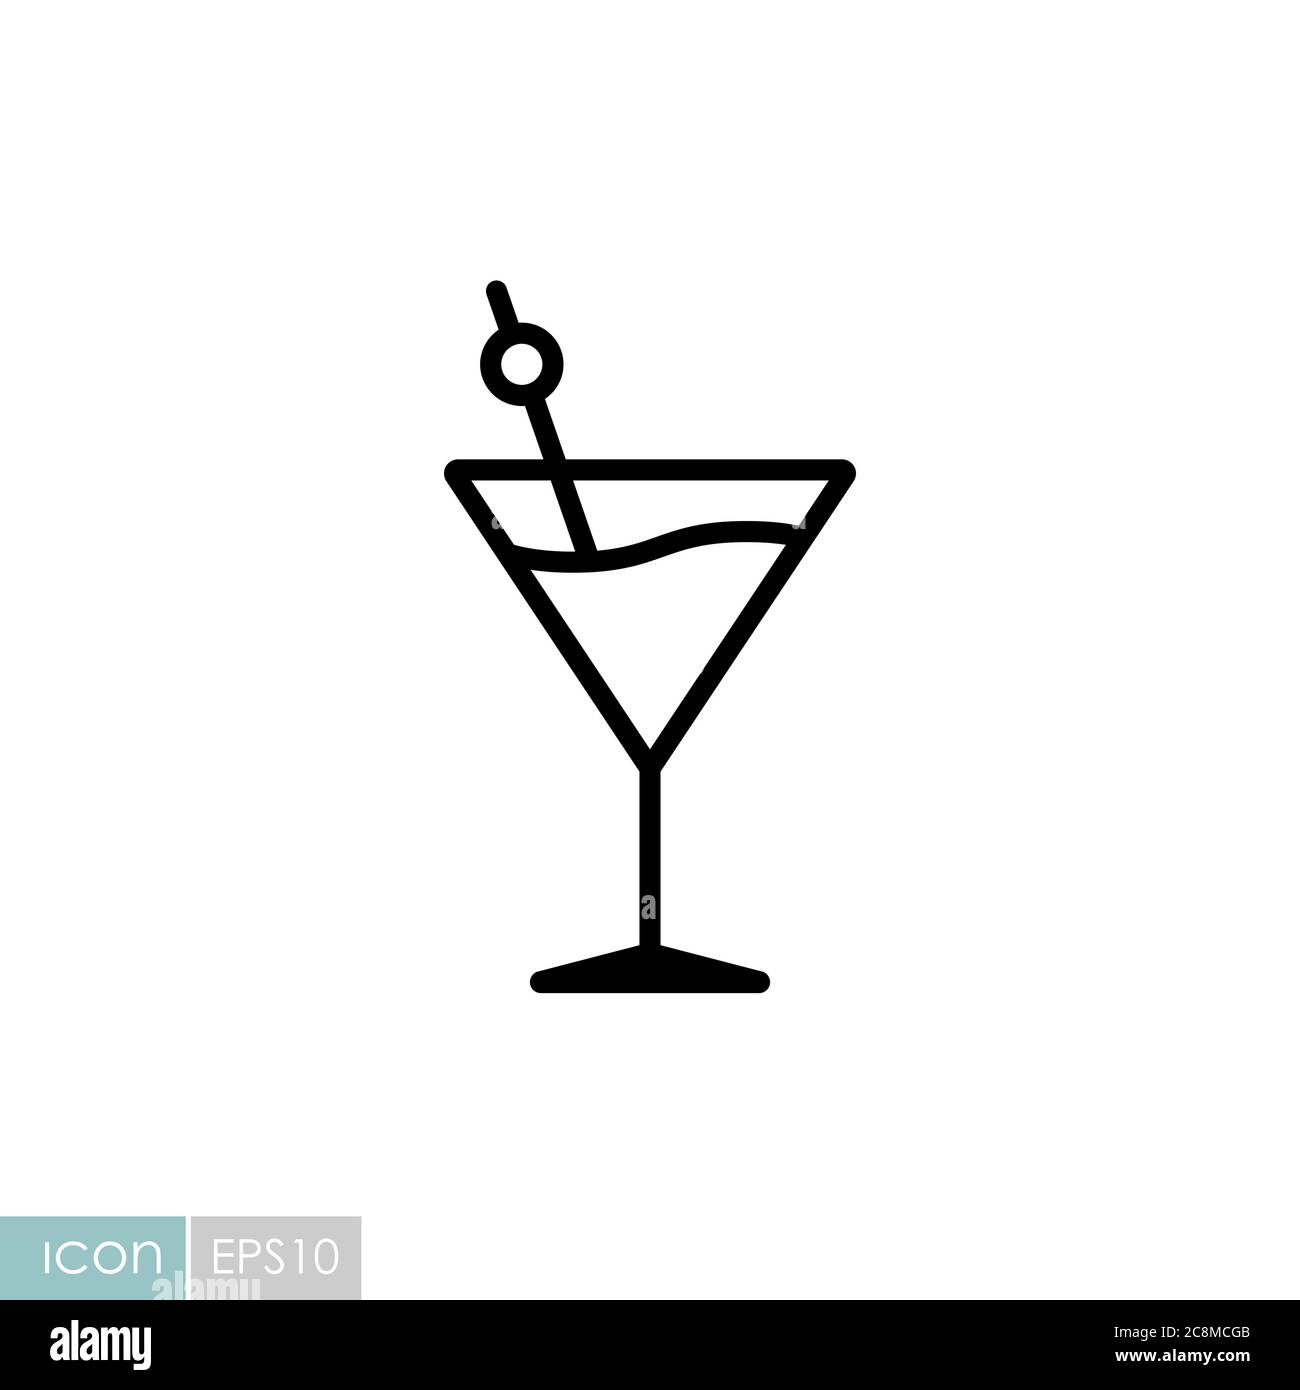 https://c8.alamy.com/comp/2C8MCGB/cocktail-drink-glass-icon-vector-graph-symbol-for-bar-and-cafe-web-site-and-apps-design-logo-app-ui-2C8MCGB.jpg